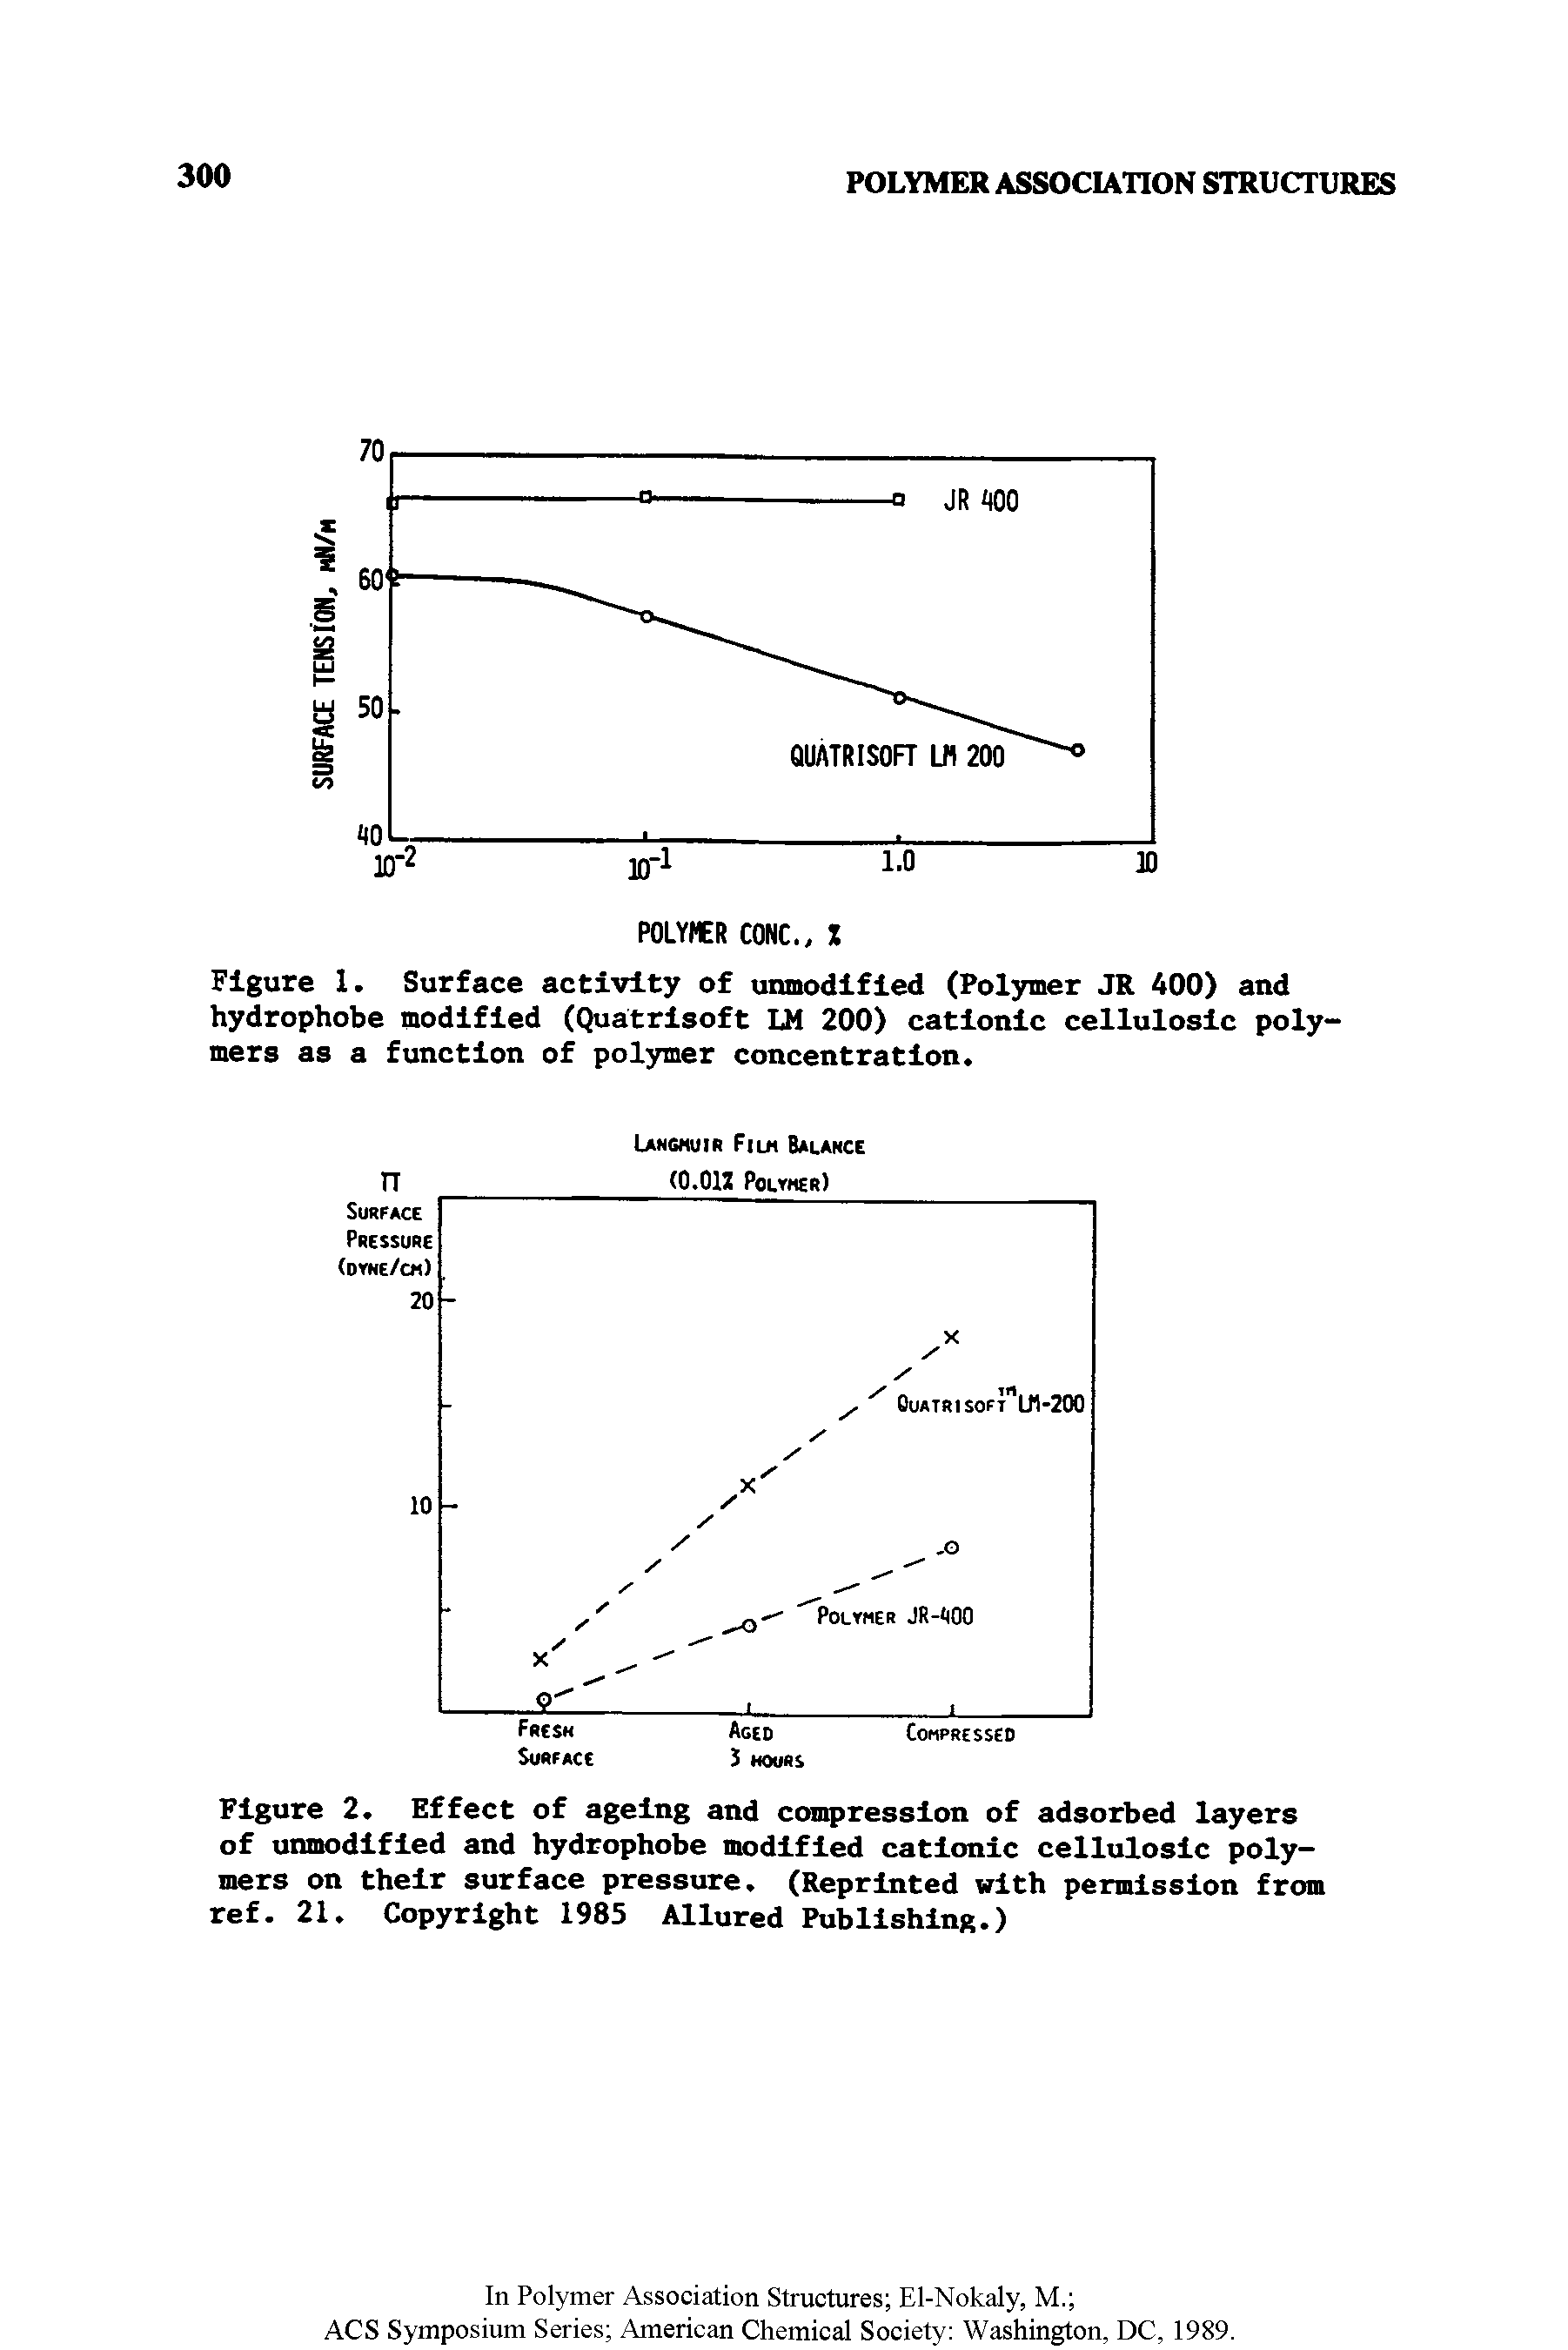 Figure 2. Effect of ageing and compression of adsorbed layers of unmodified and hydrophobe modified cationic celluloslc polymers on their surface pressure. (Reprinted with permission from ref. 21. Copyright 1985 Allured Publishing.)...